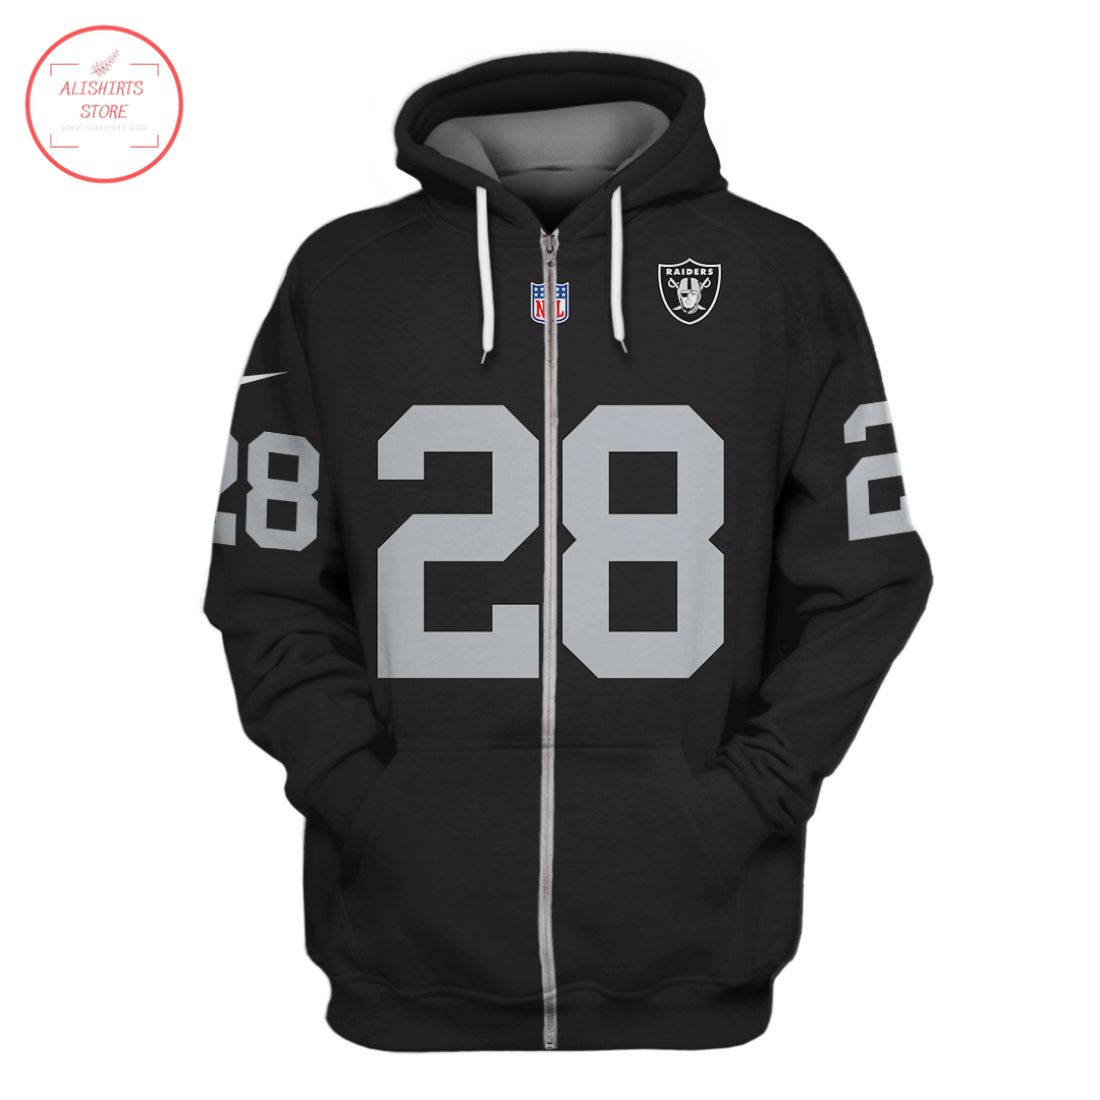 NFL Oakland Raiders Jacobs Shirt and Hoodie